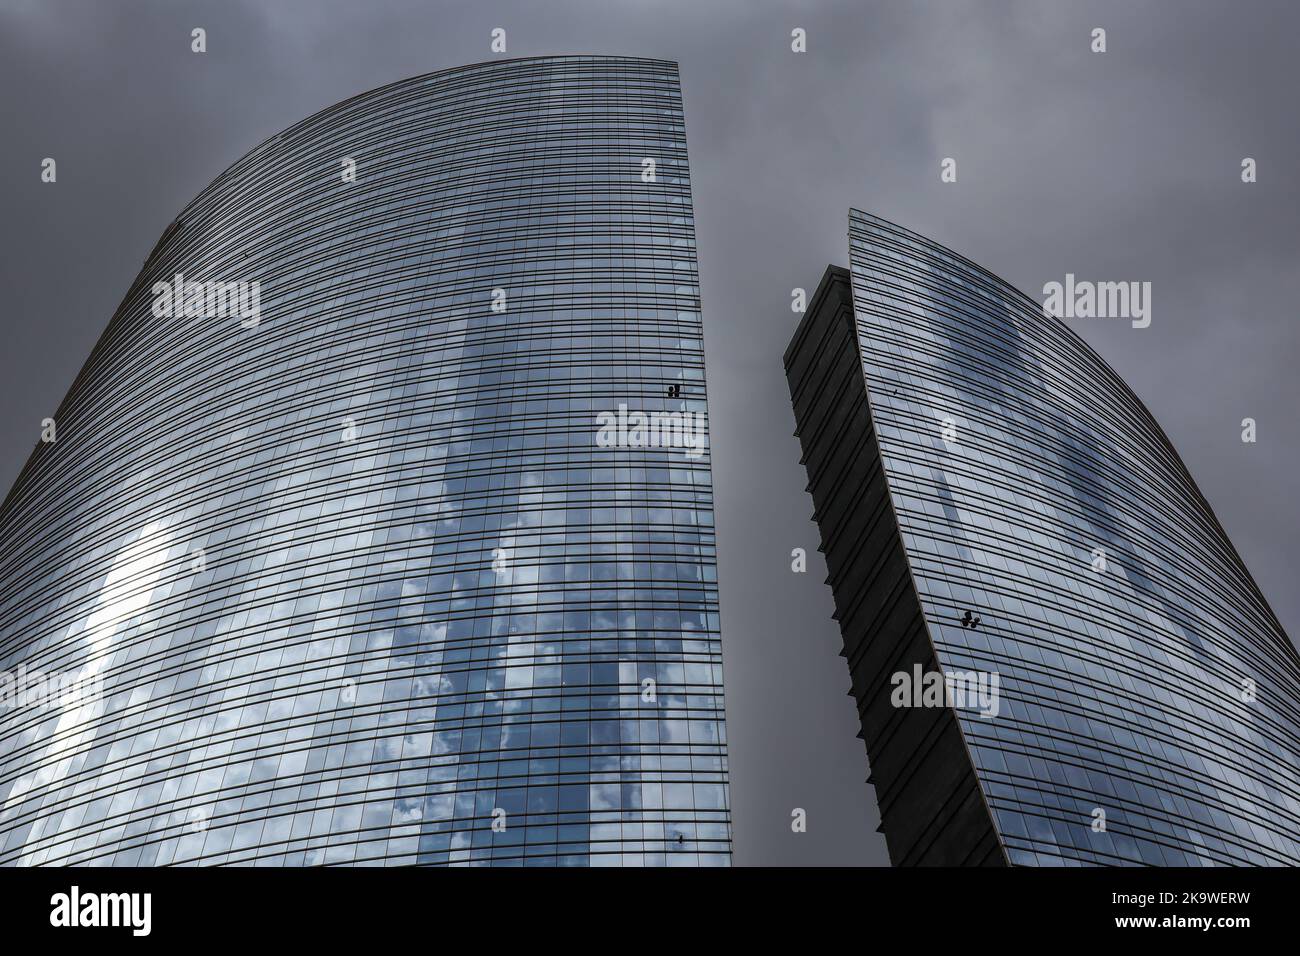 Milan, Italy - June 26, 2022: Below Architecture of Unicredit Tower in Porta Nuova. Modern Glass Architecture in Lombardy with Cloudy Sky. Stock Photo